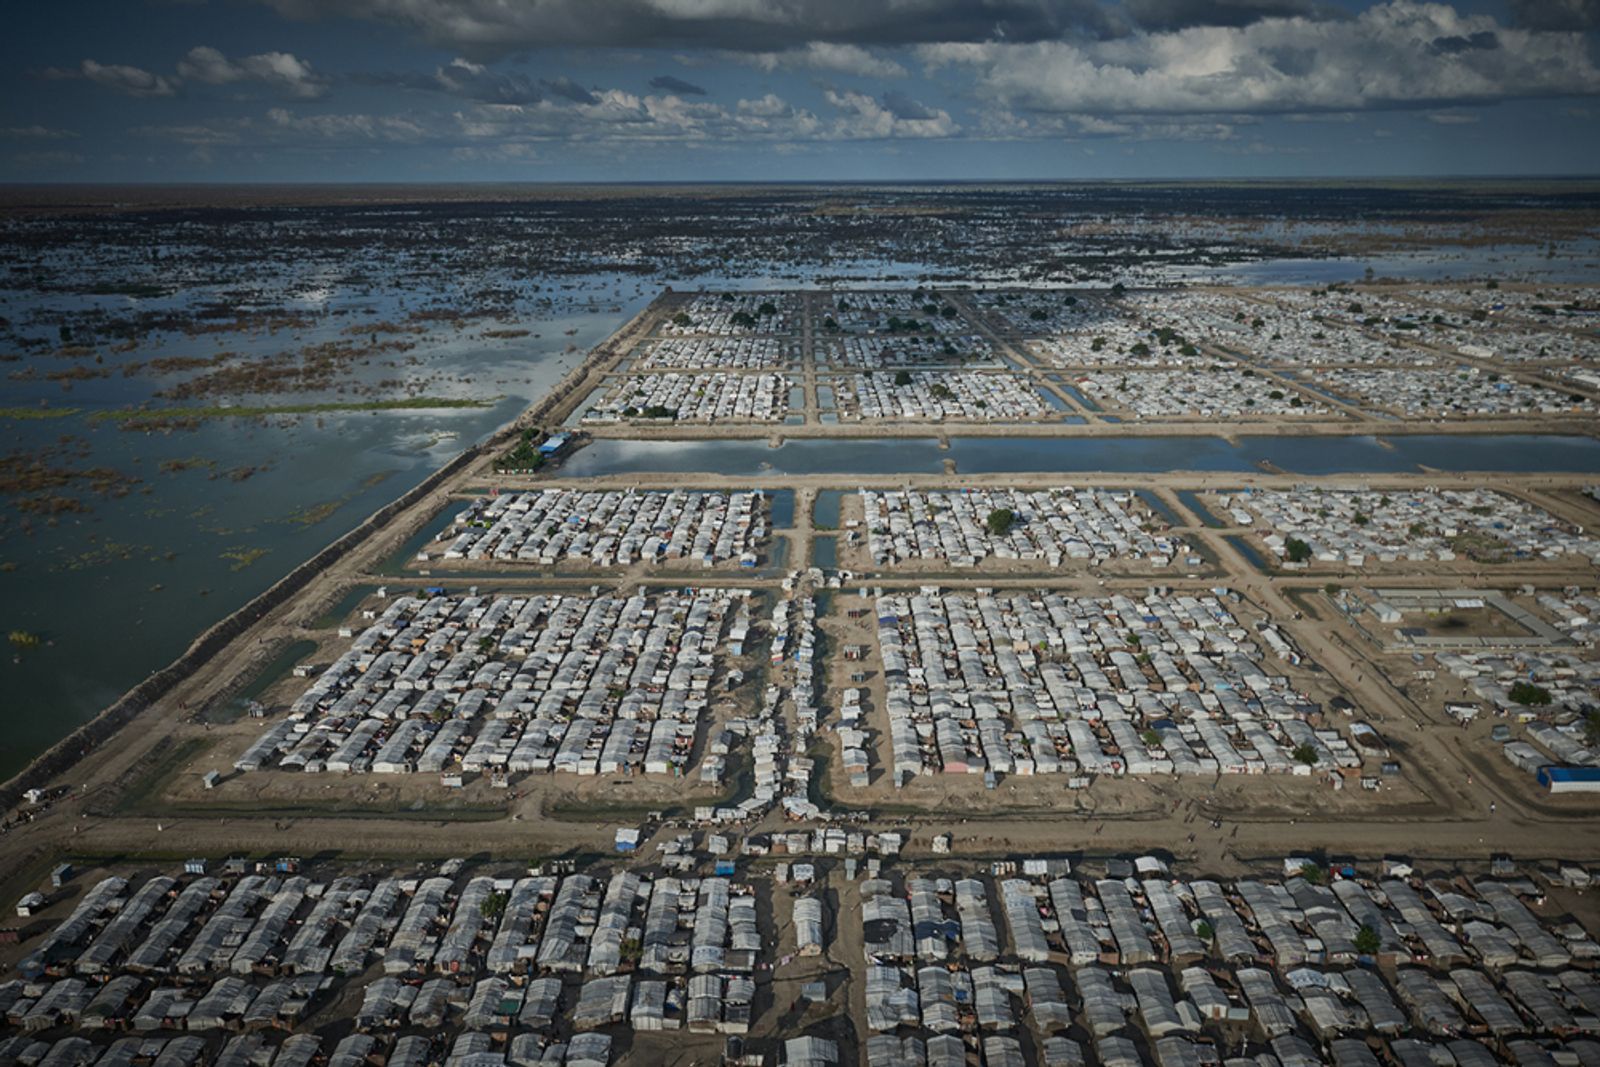 © Christina Simons - The flooded landscape around Bentiu Internally Displaced Population camp as viewed from above.